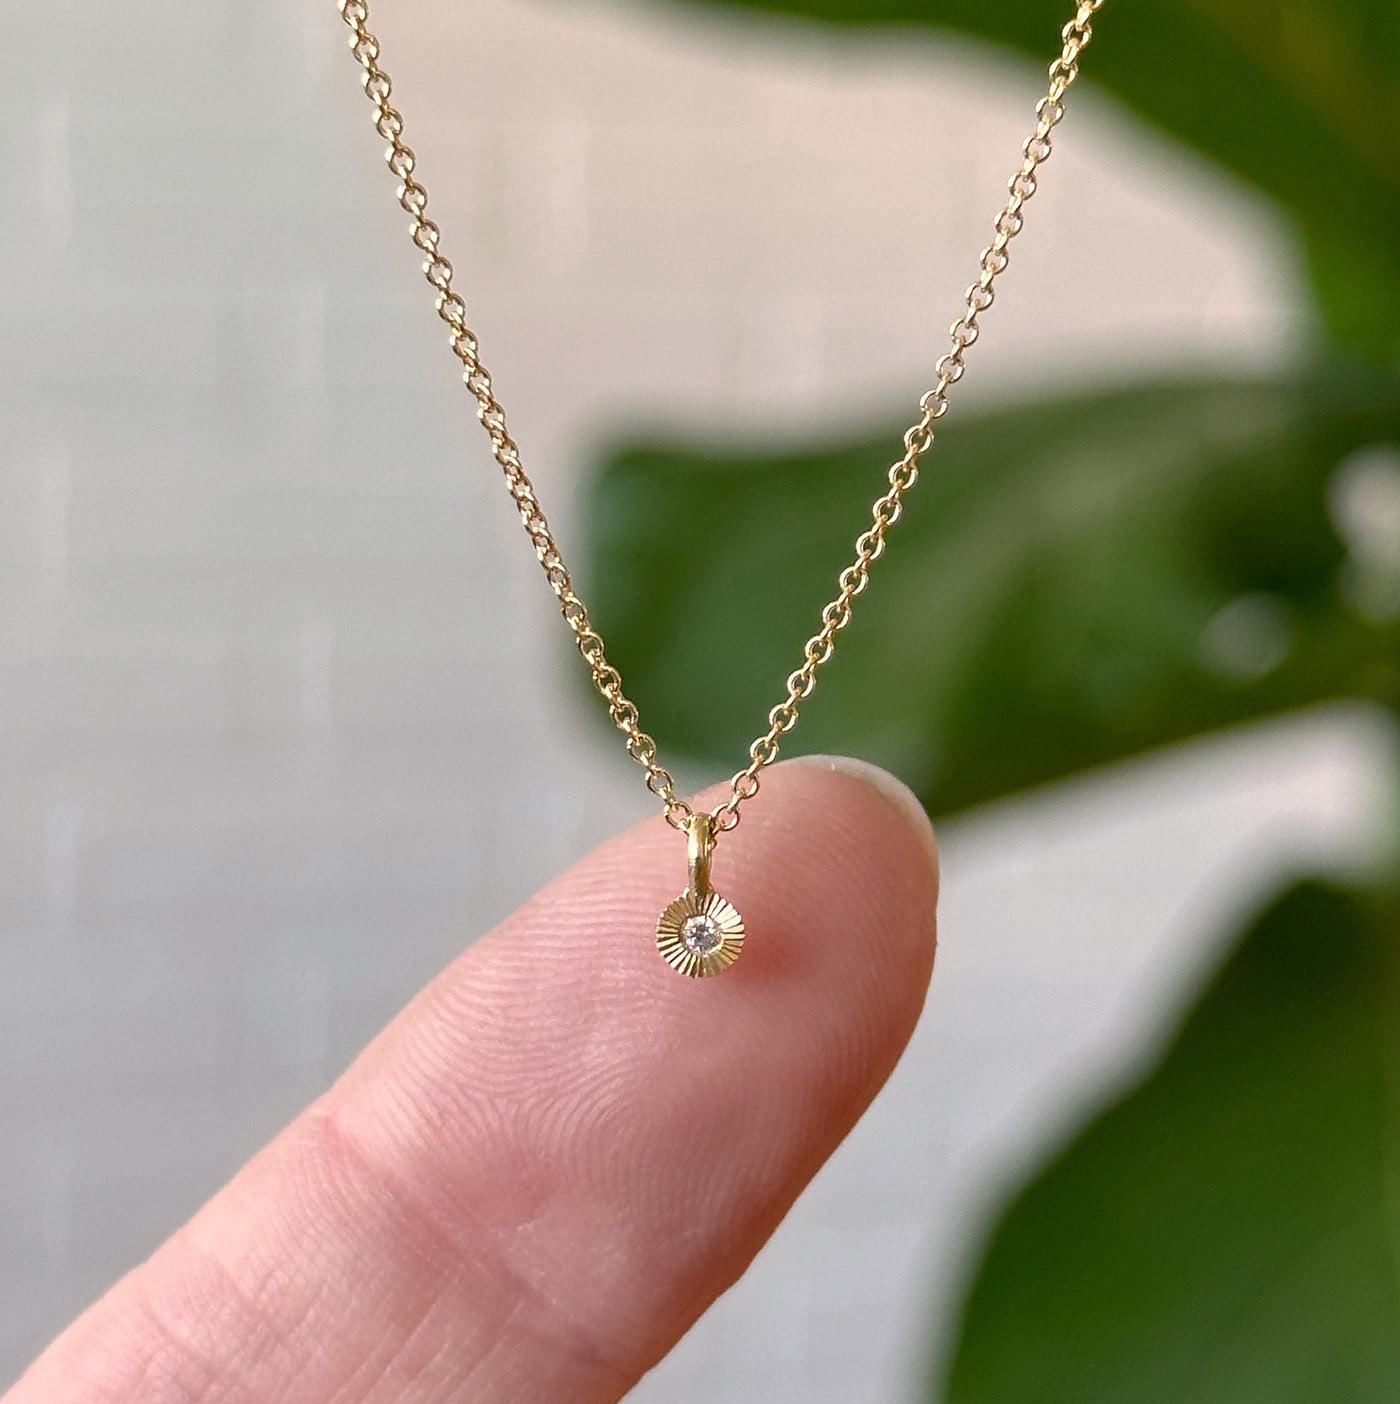 Gold and Diamond Rise Necklace hanging in front of a white wall with finger in picture for scale